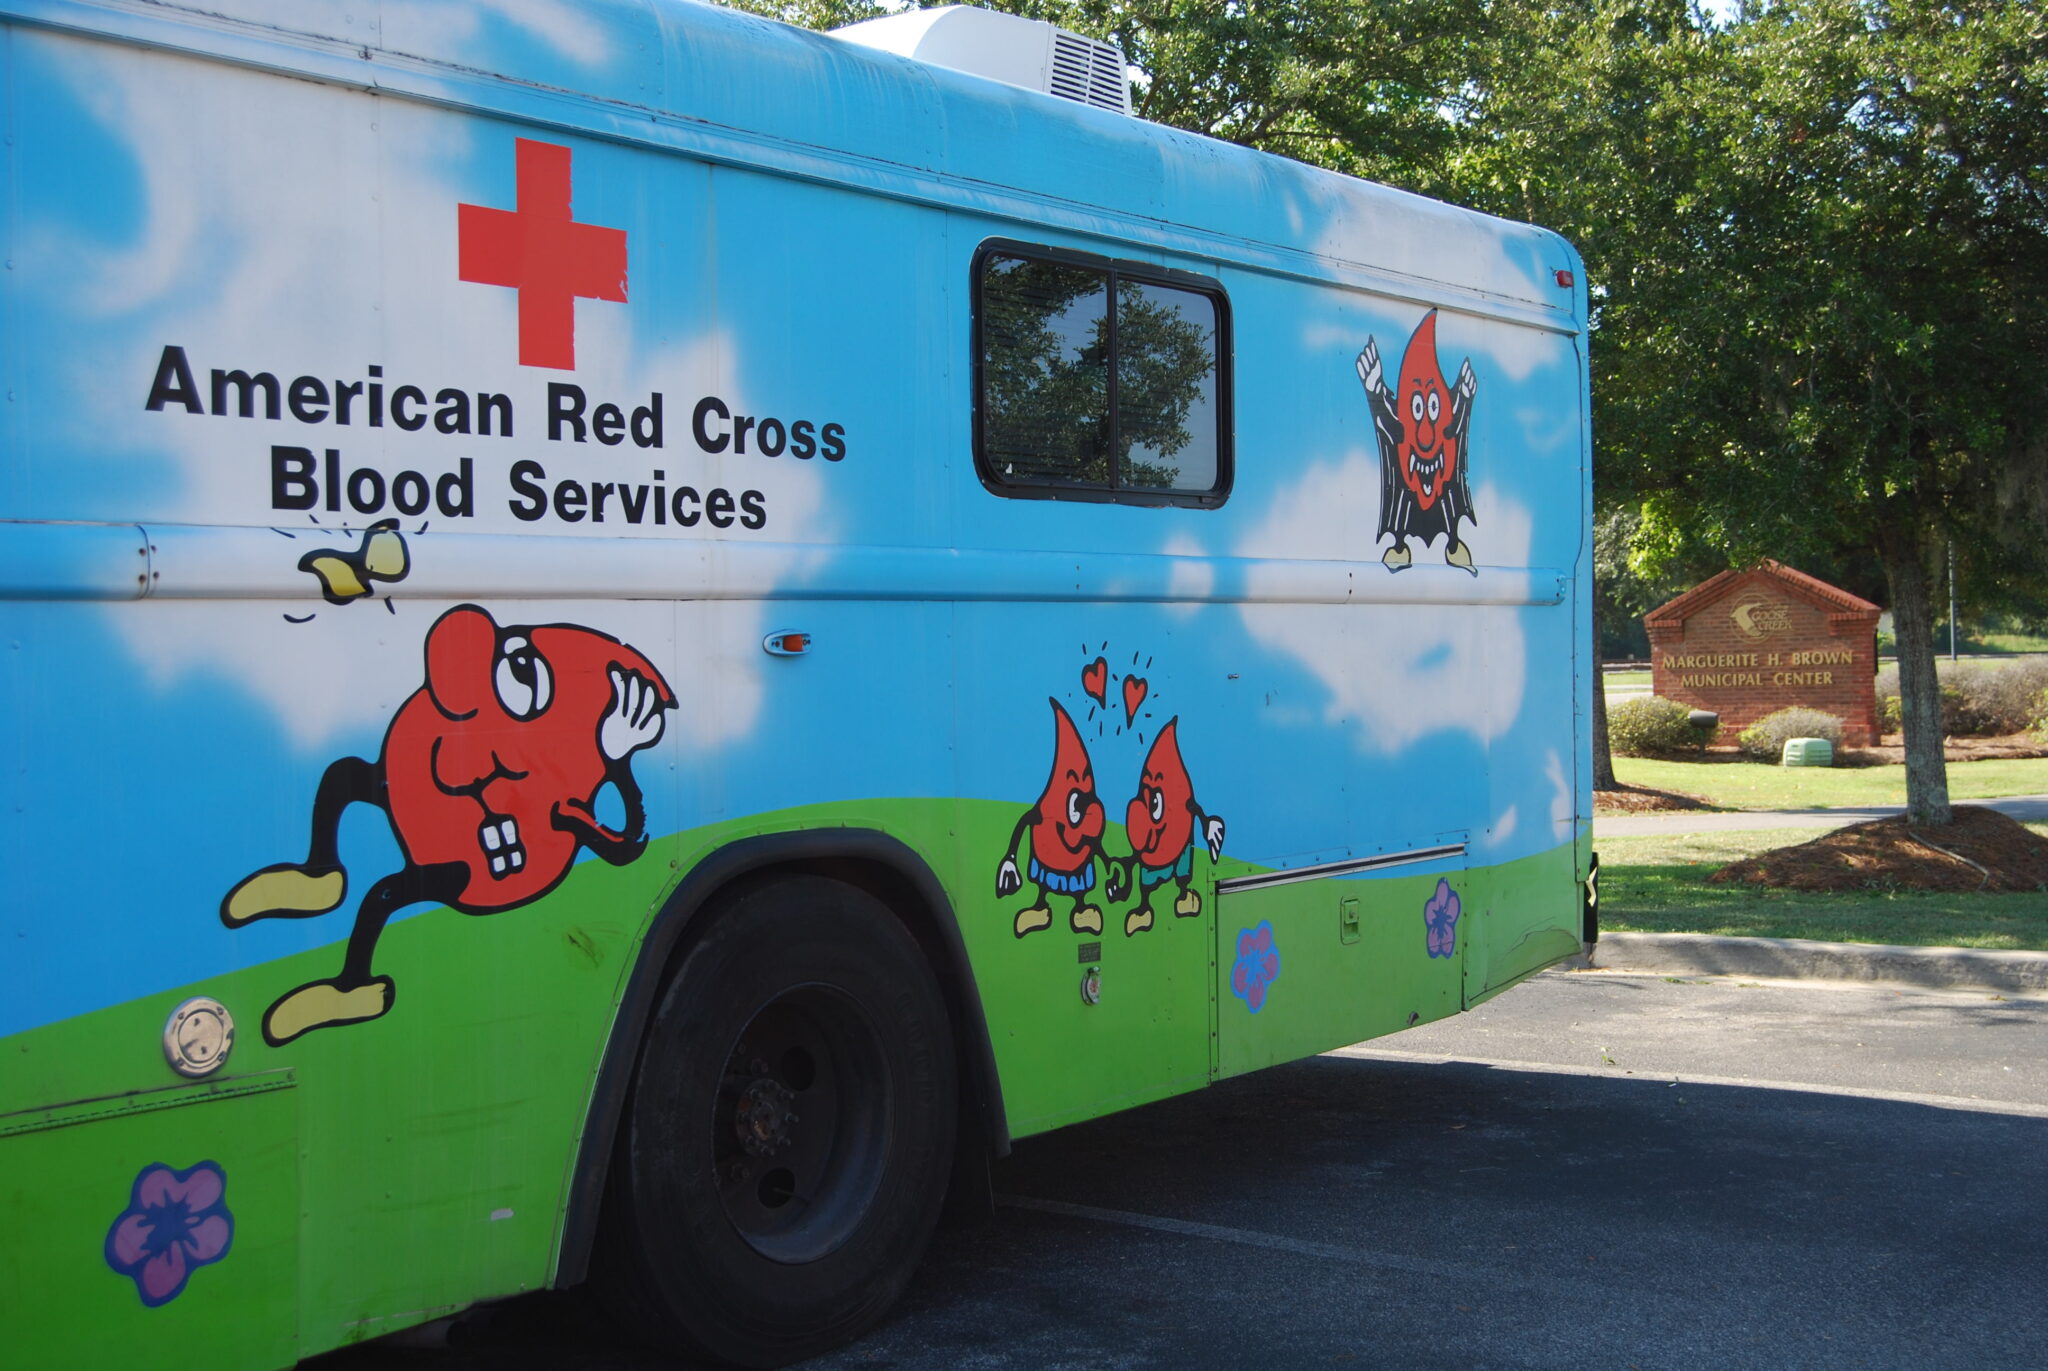 The American Red Cross Bloodmobile returns to the Goose Creek Municipal Center from 9 a.m. to 2 p.m. on Friday, Aug. 12.